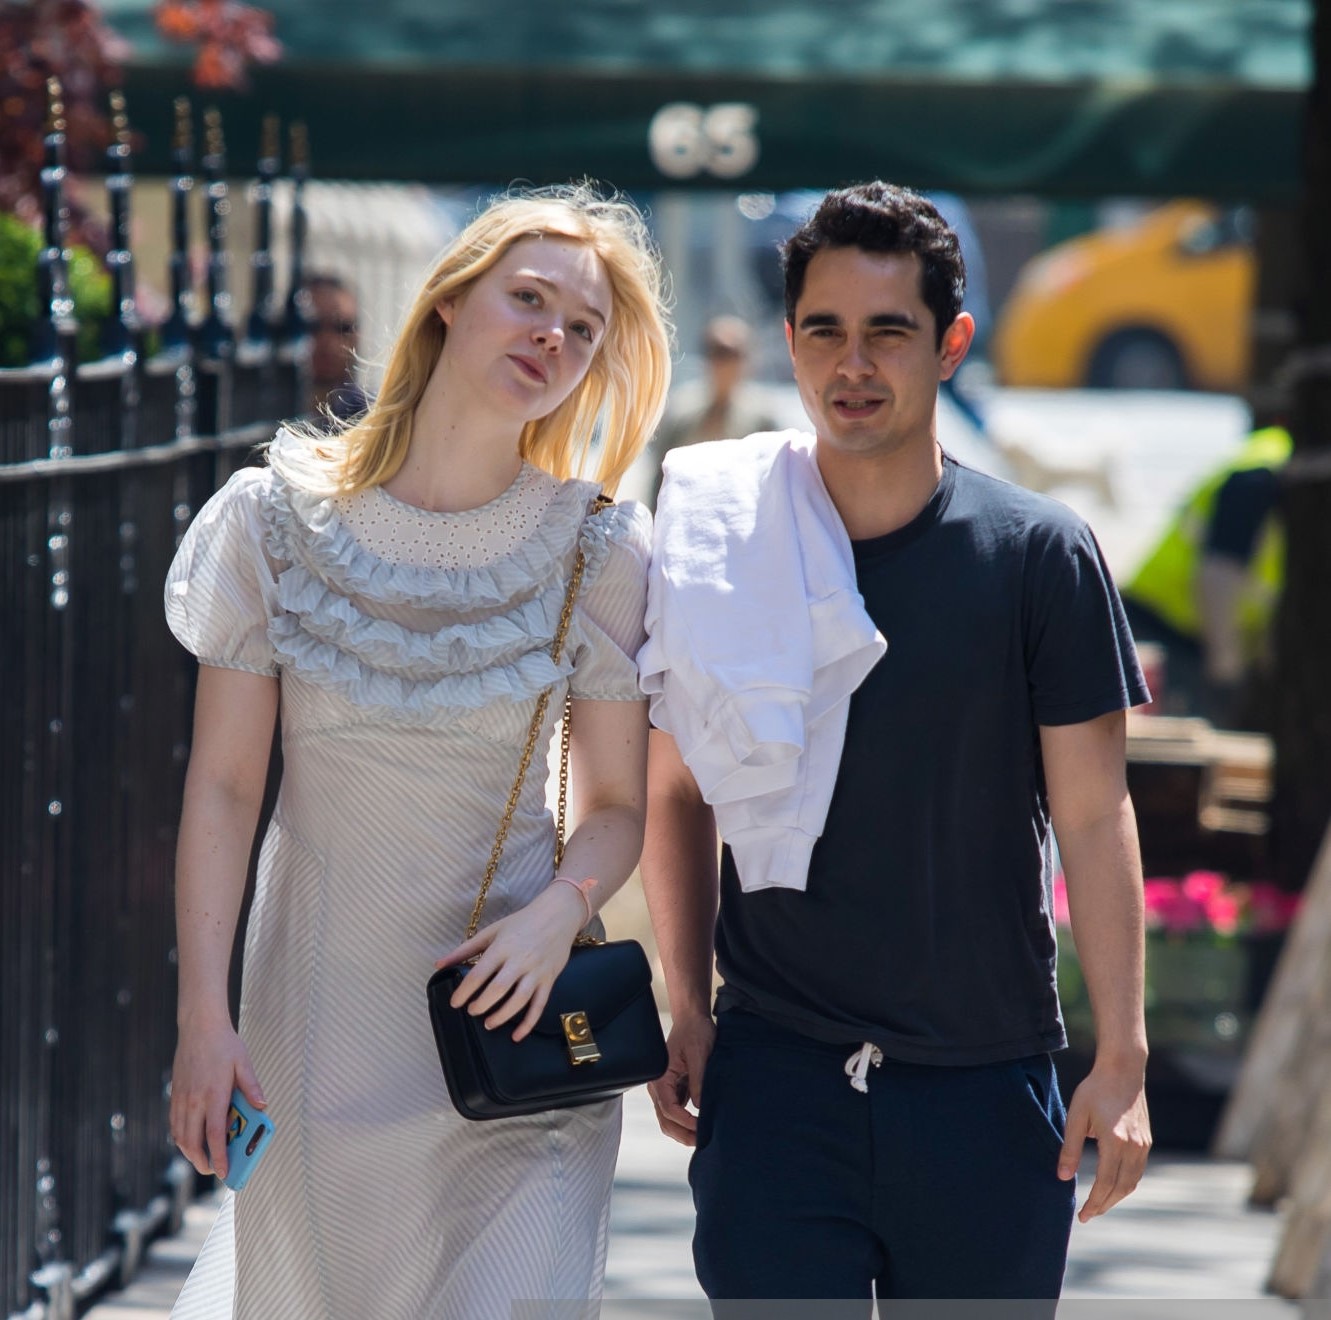 Max Minghella with his beautiful girlfriend, Elle Fanning.